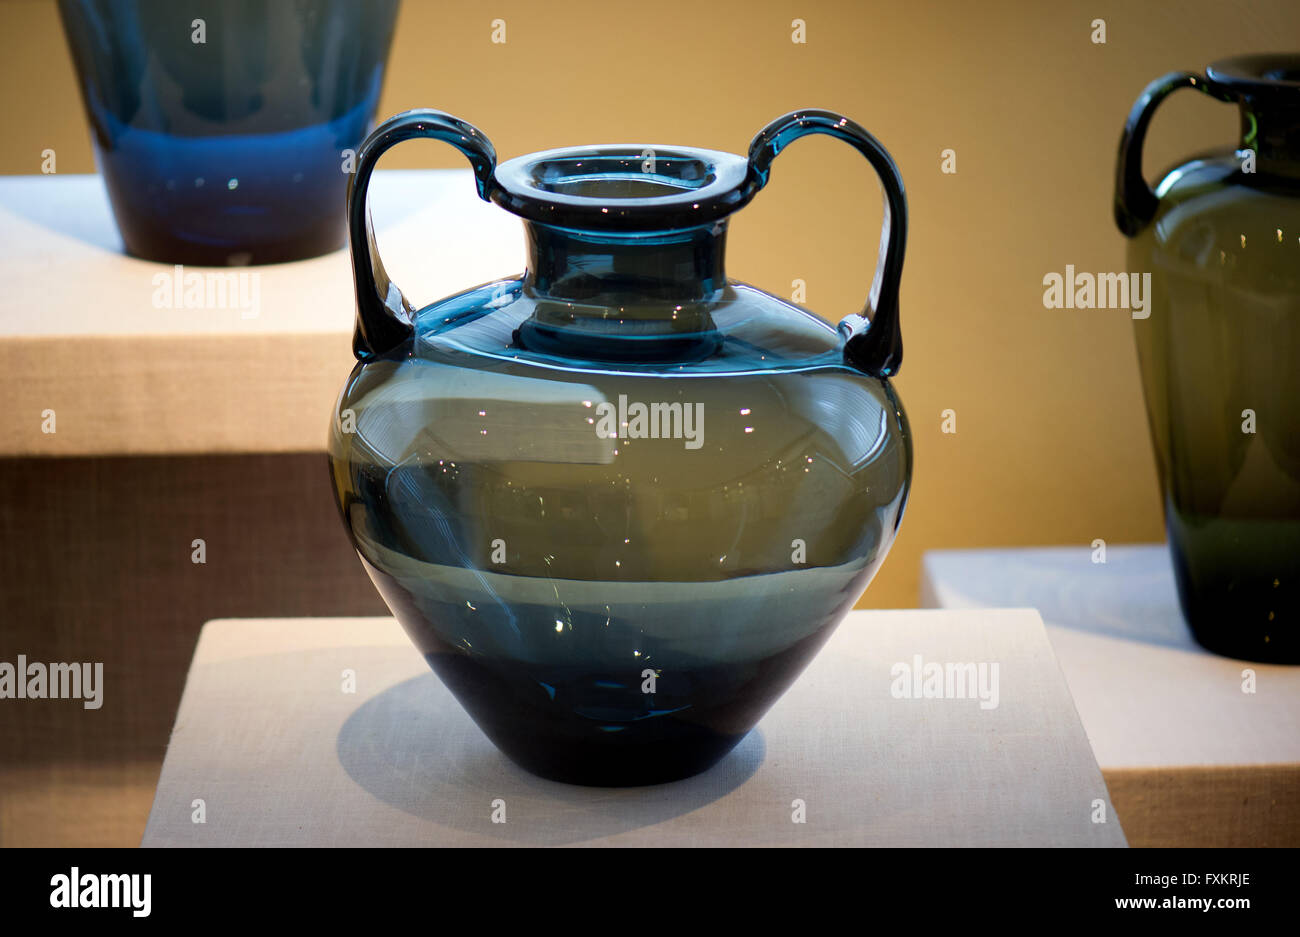 Weisswasser, Germany. 14th Apr, 2016. Vases of designer Wilhelm Wagenfeld (1910-1990) can be seen at the glas museum in Weisswasser, Germany, 14 April 2016. Photo: Arno Burgi/dpa/Alamy Live News Stock Photo